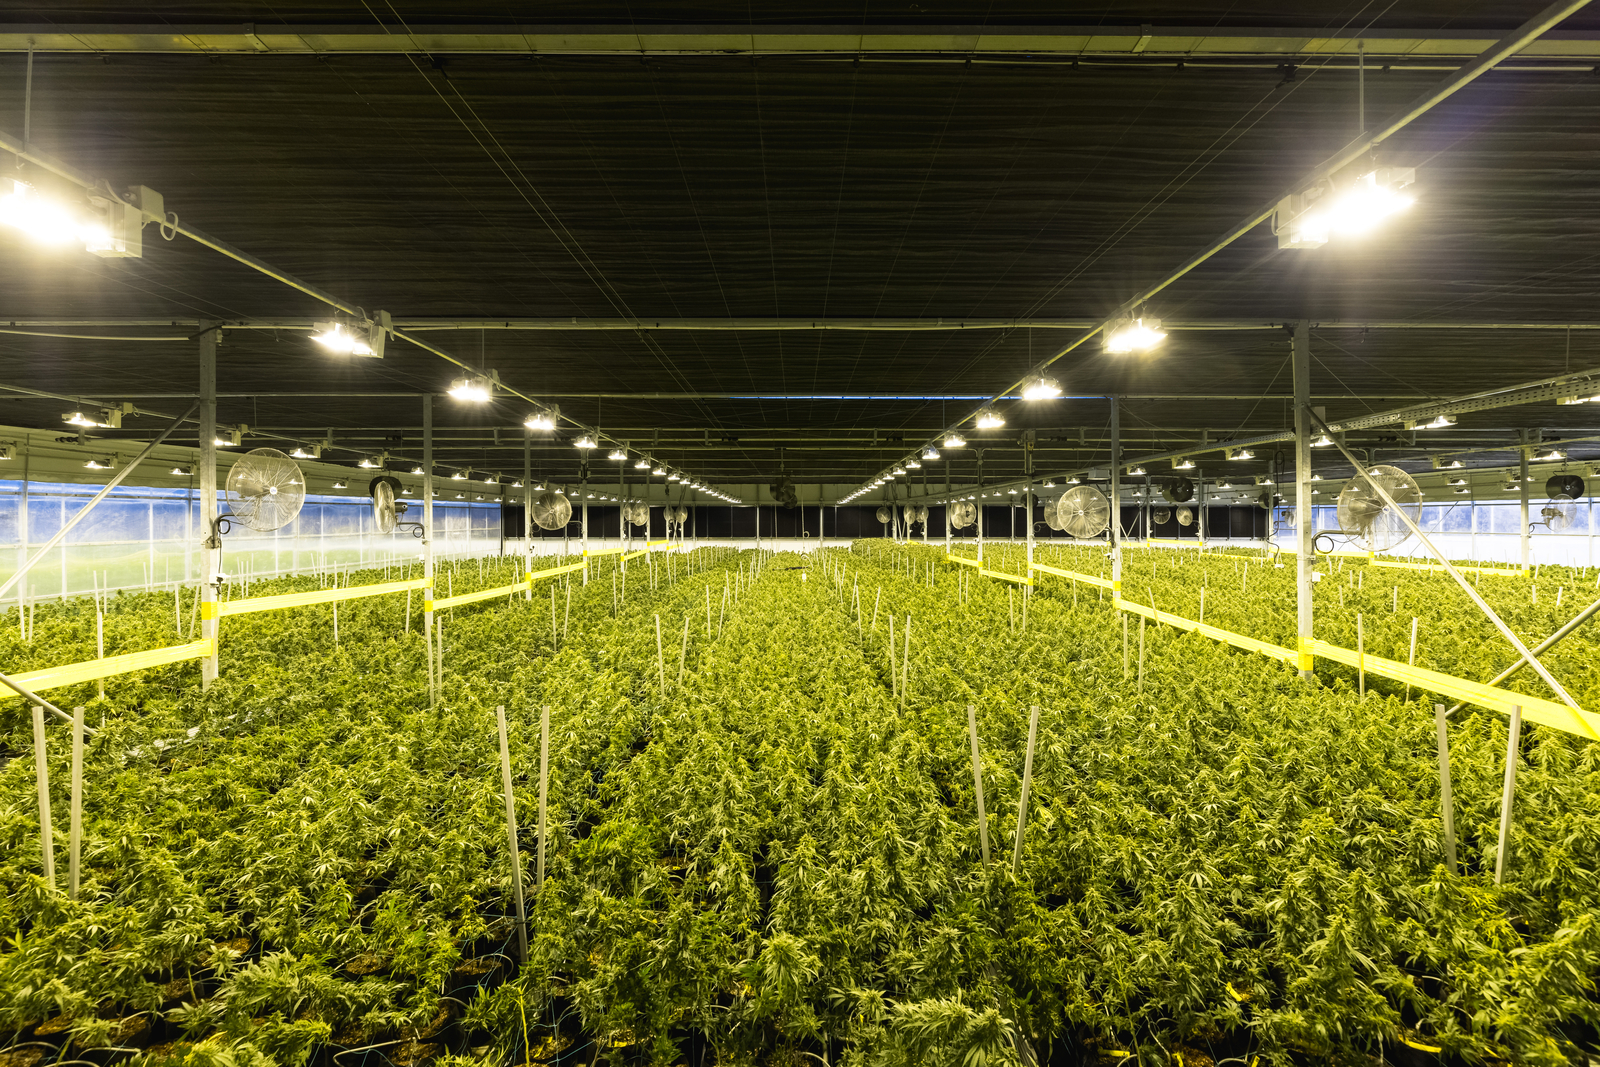 Growing medical cannabis in greenhouses with the right light deprivation system